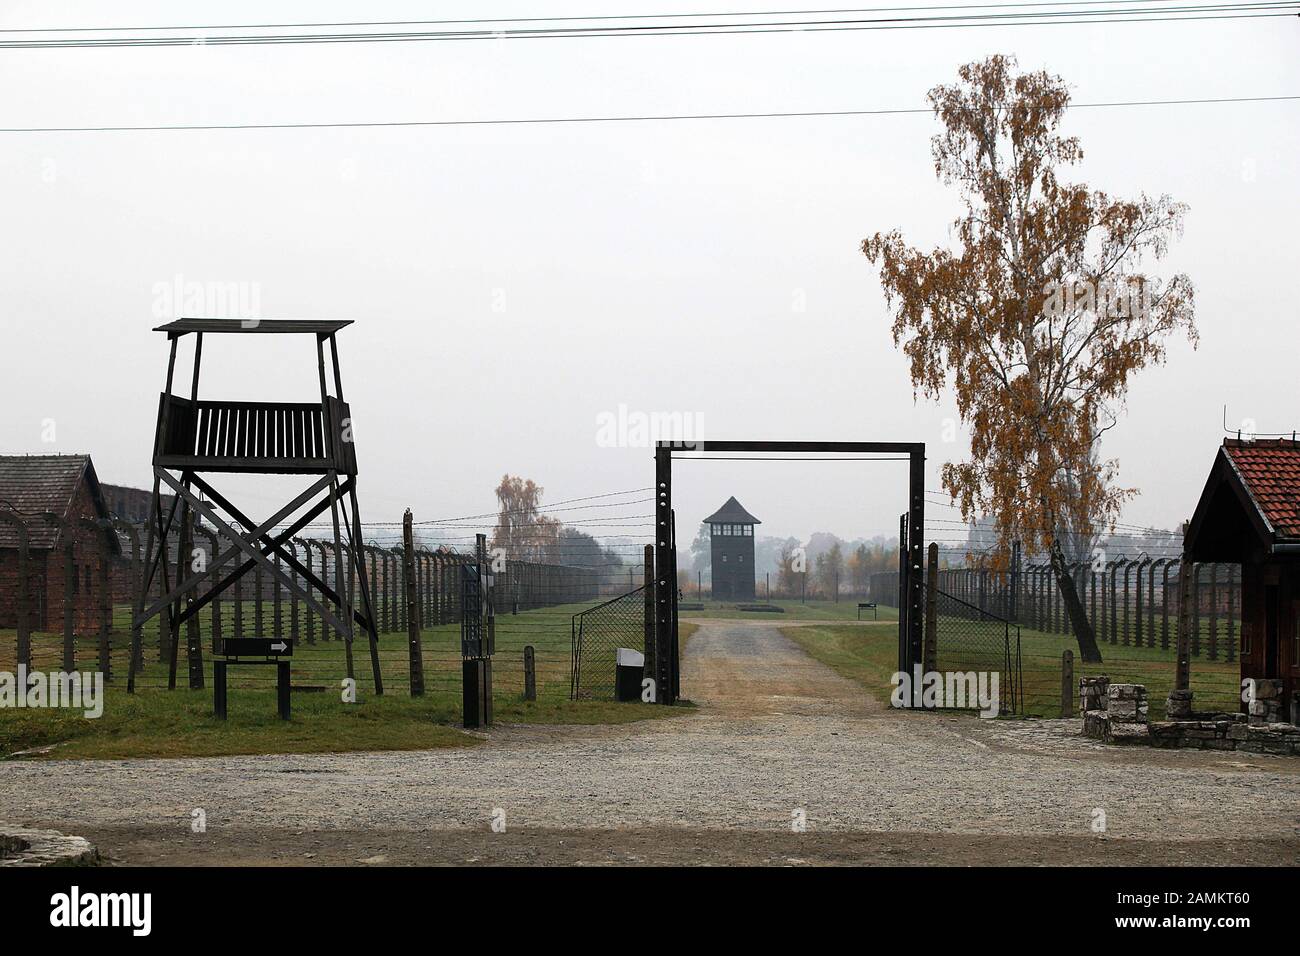 Watchtower at an entrance gate to the memorial site in the former concentration camp Auschwitz - Birkenau. [automated translation] Stock Photo